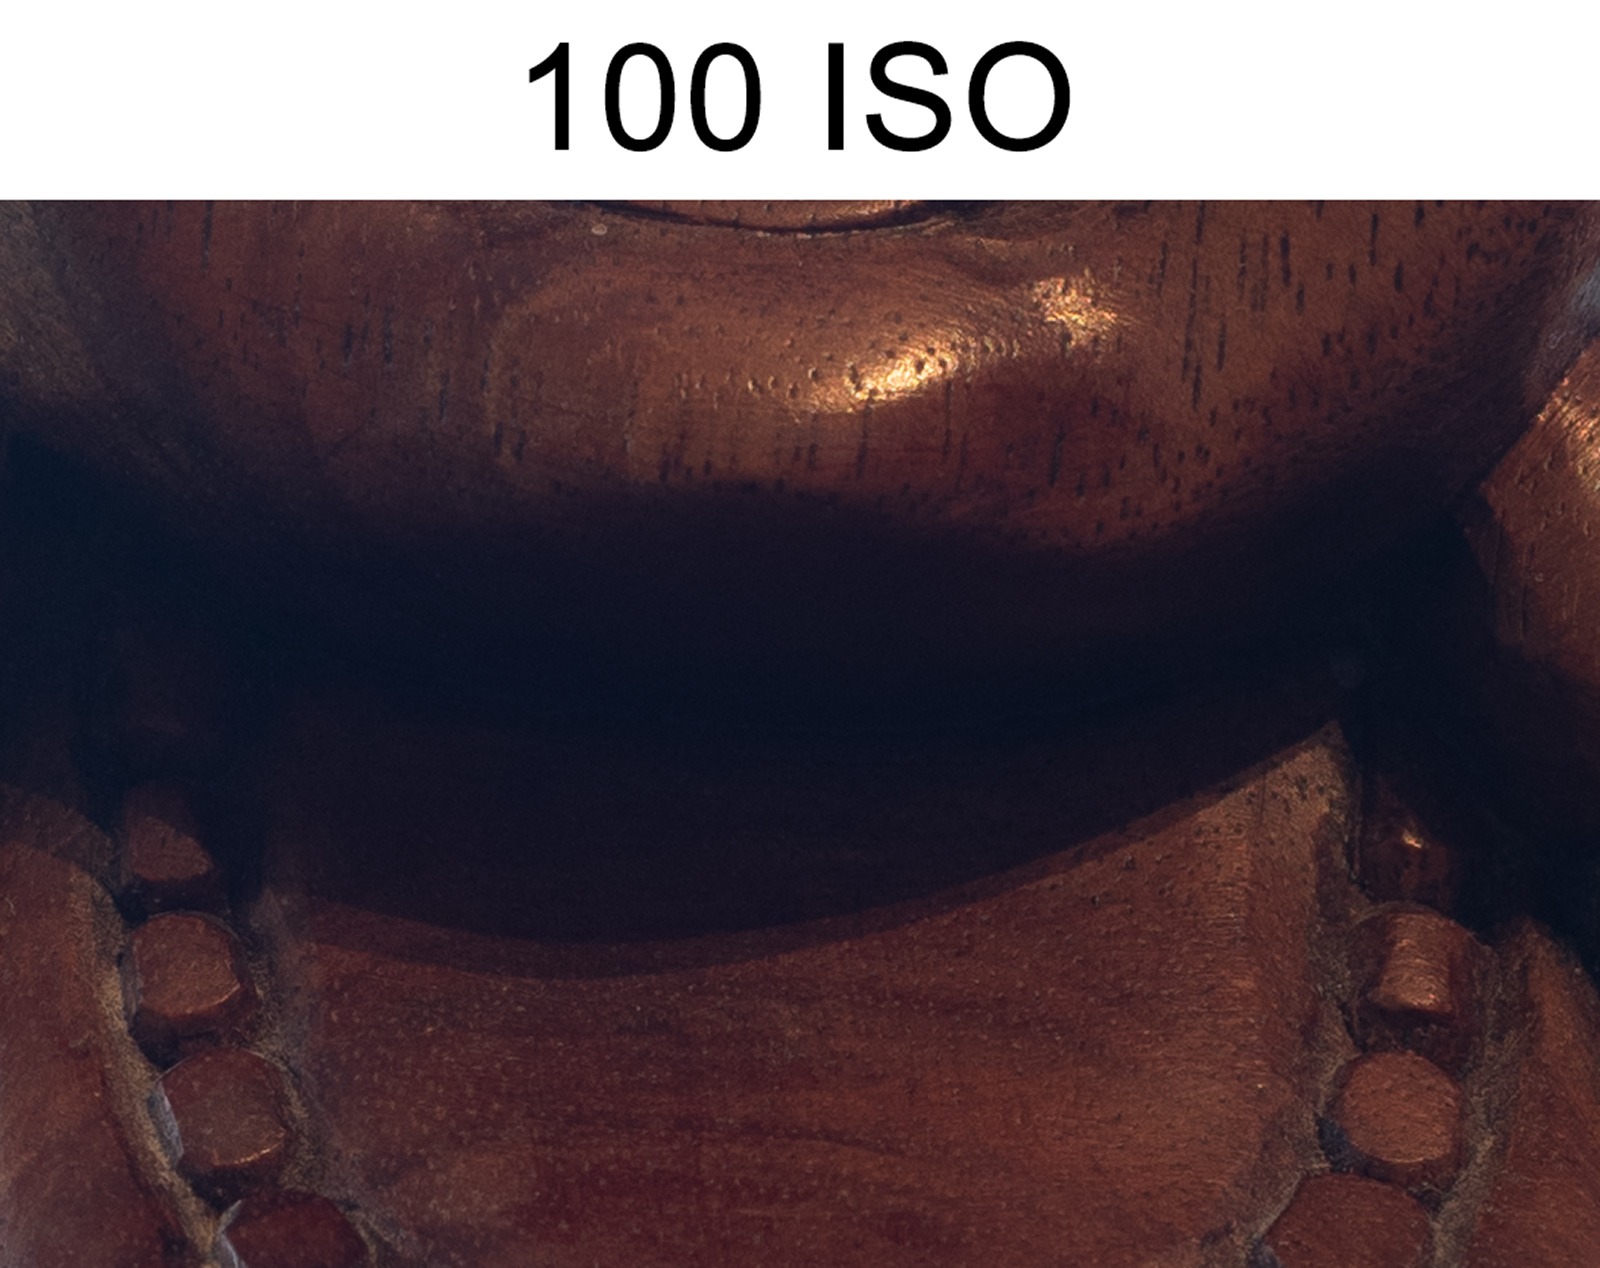 100 iso